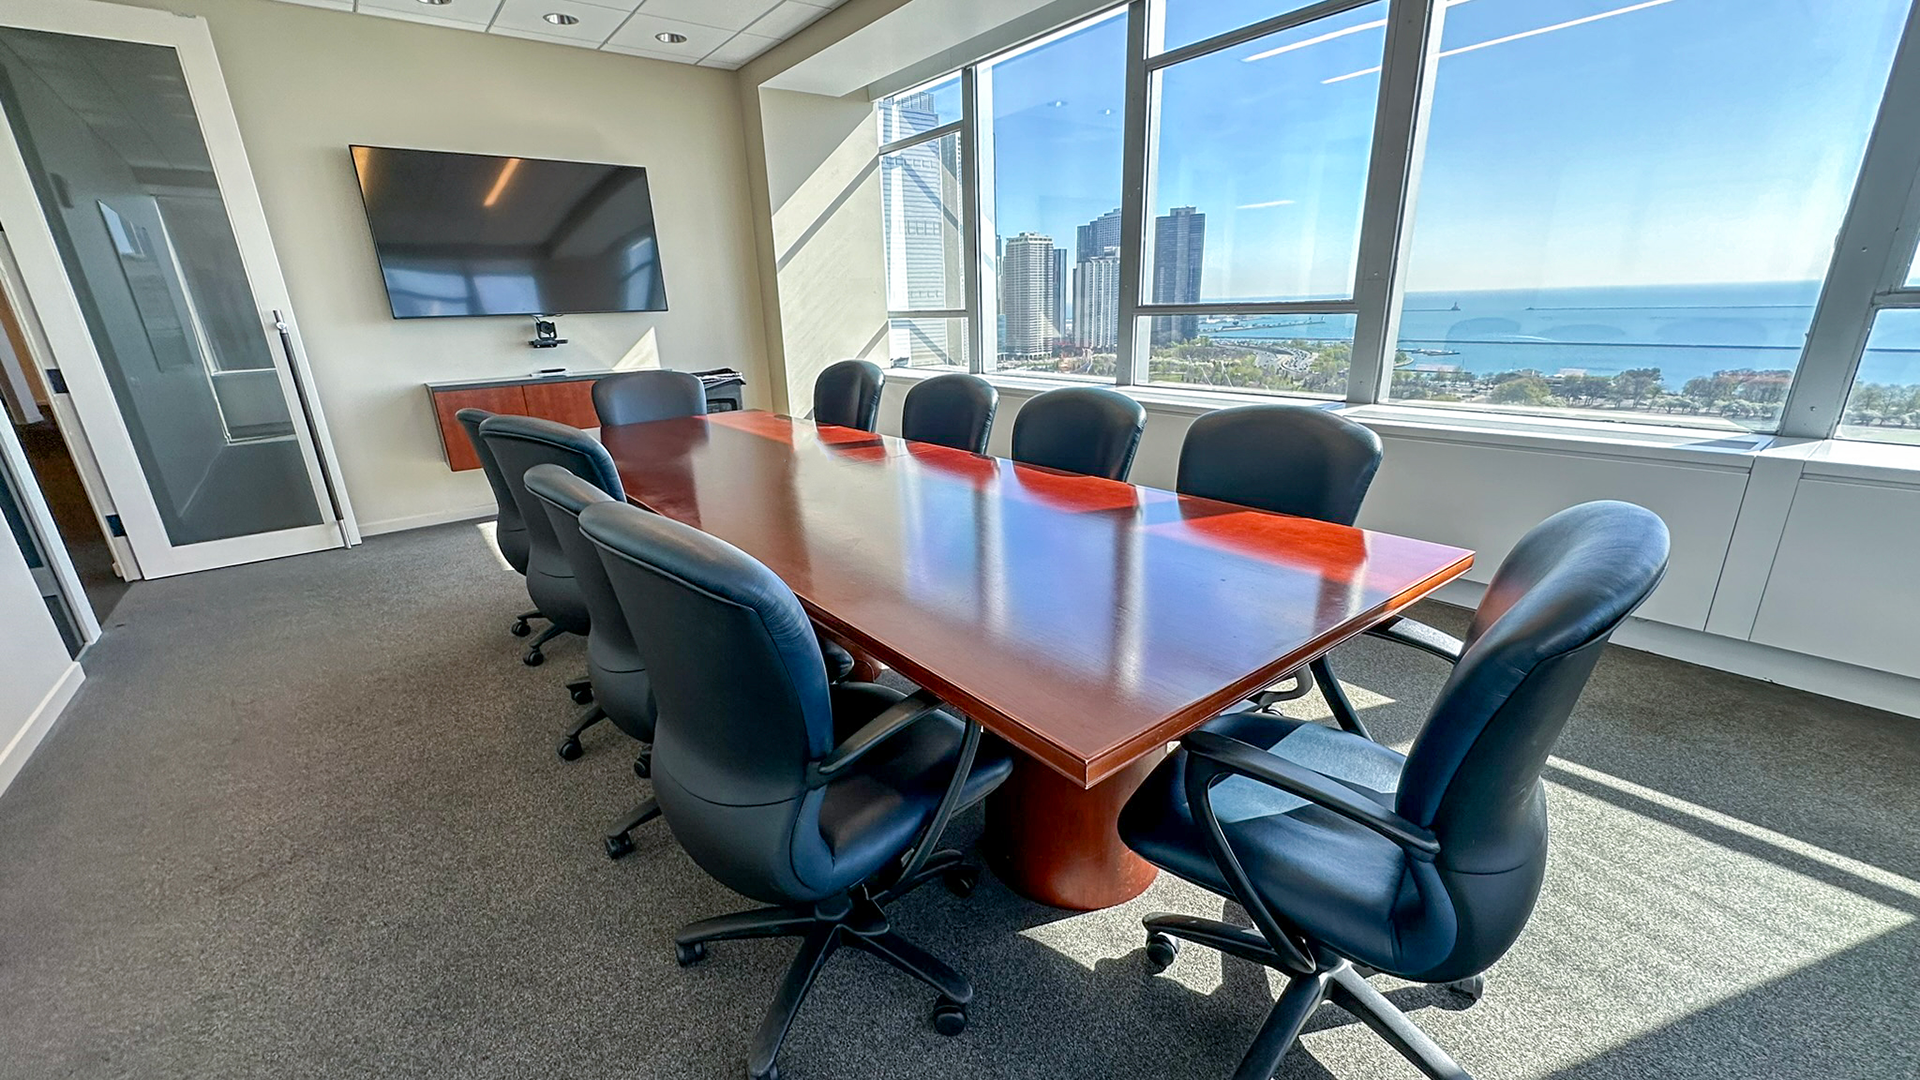 Conference room with view of Lake Michigan